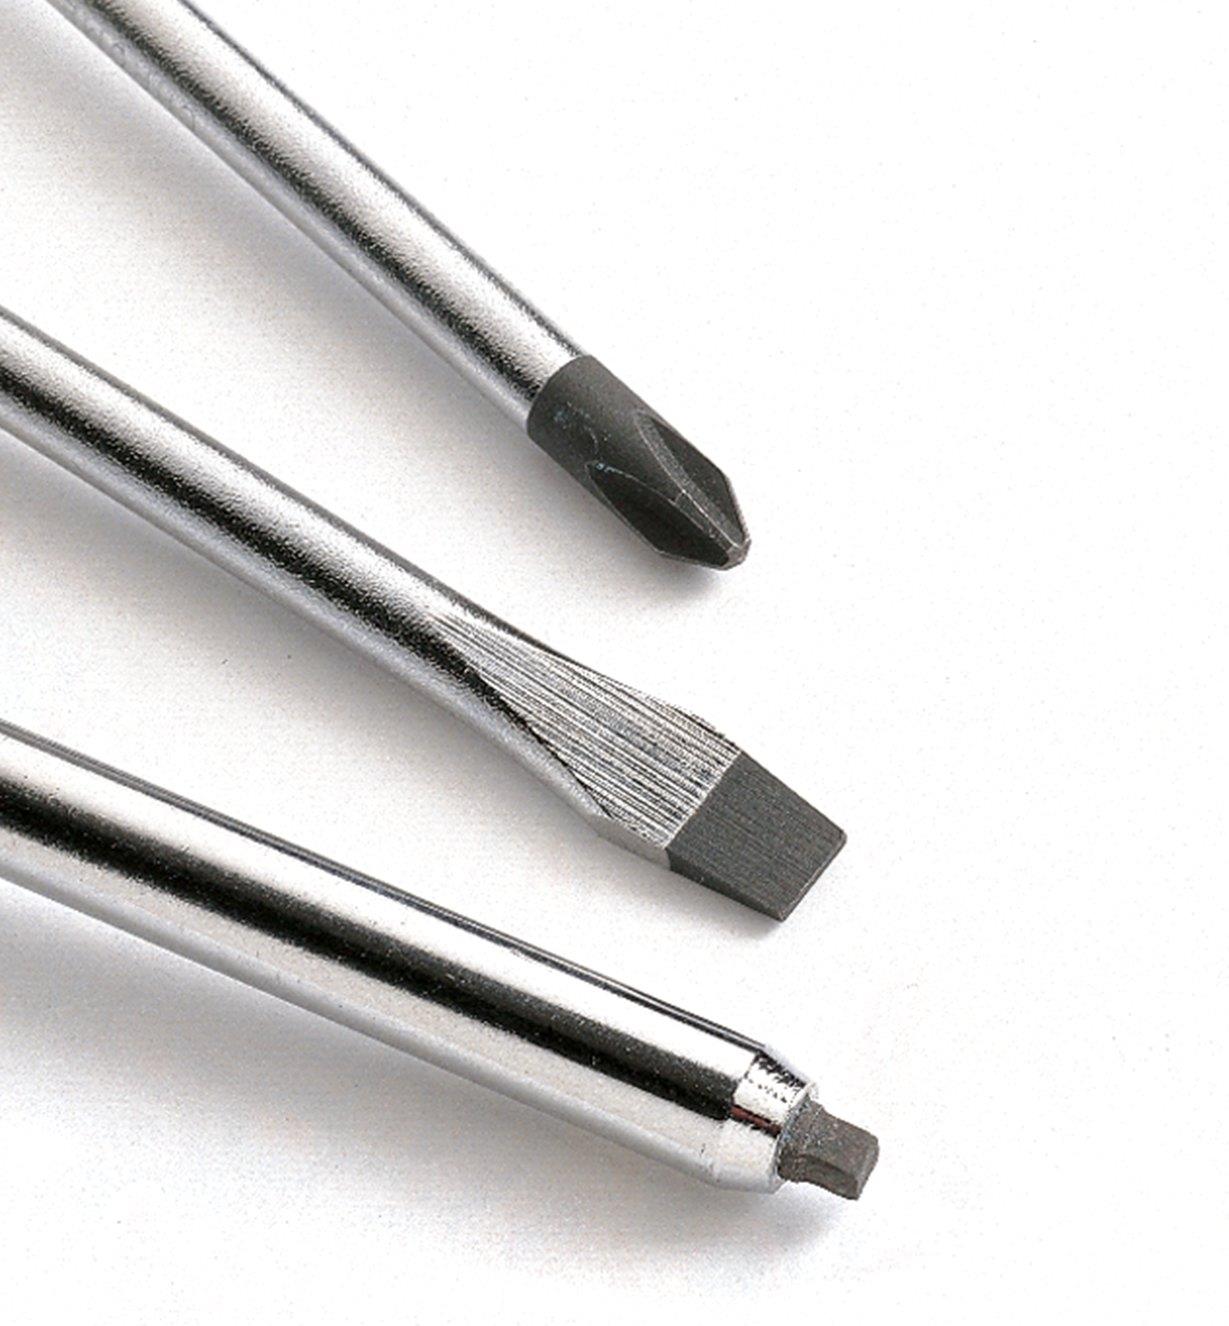 Close-up of three different screwdriver tips